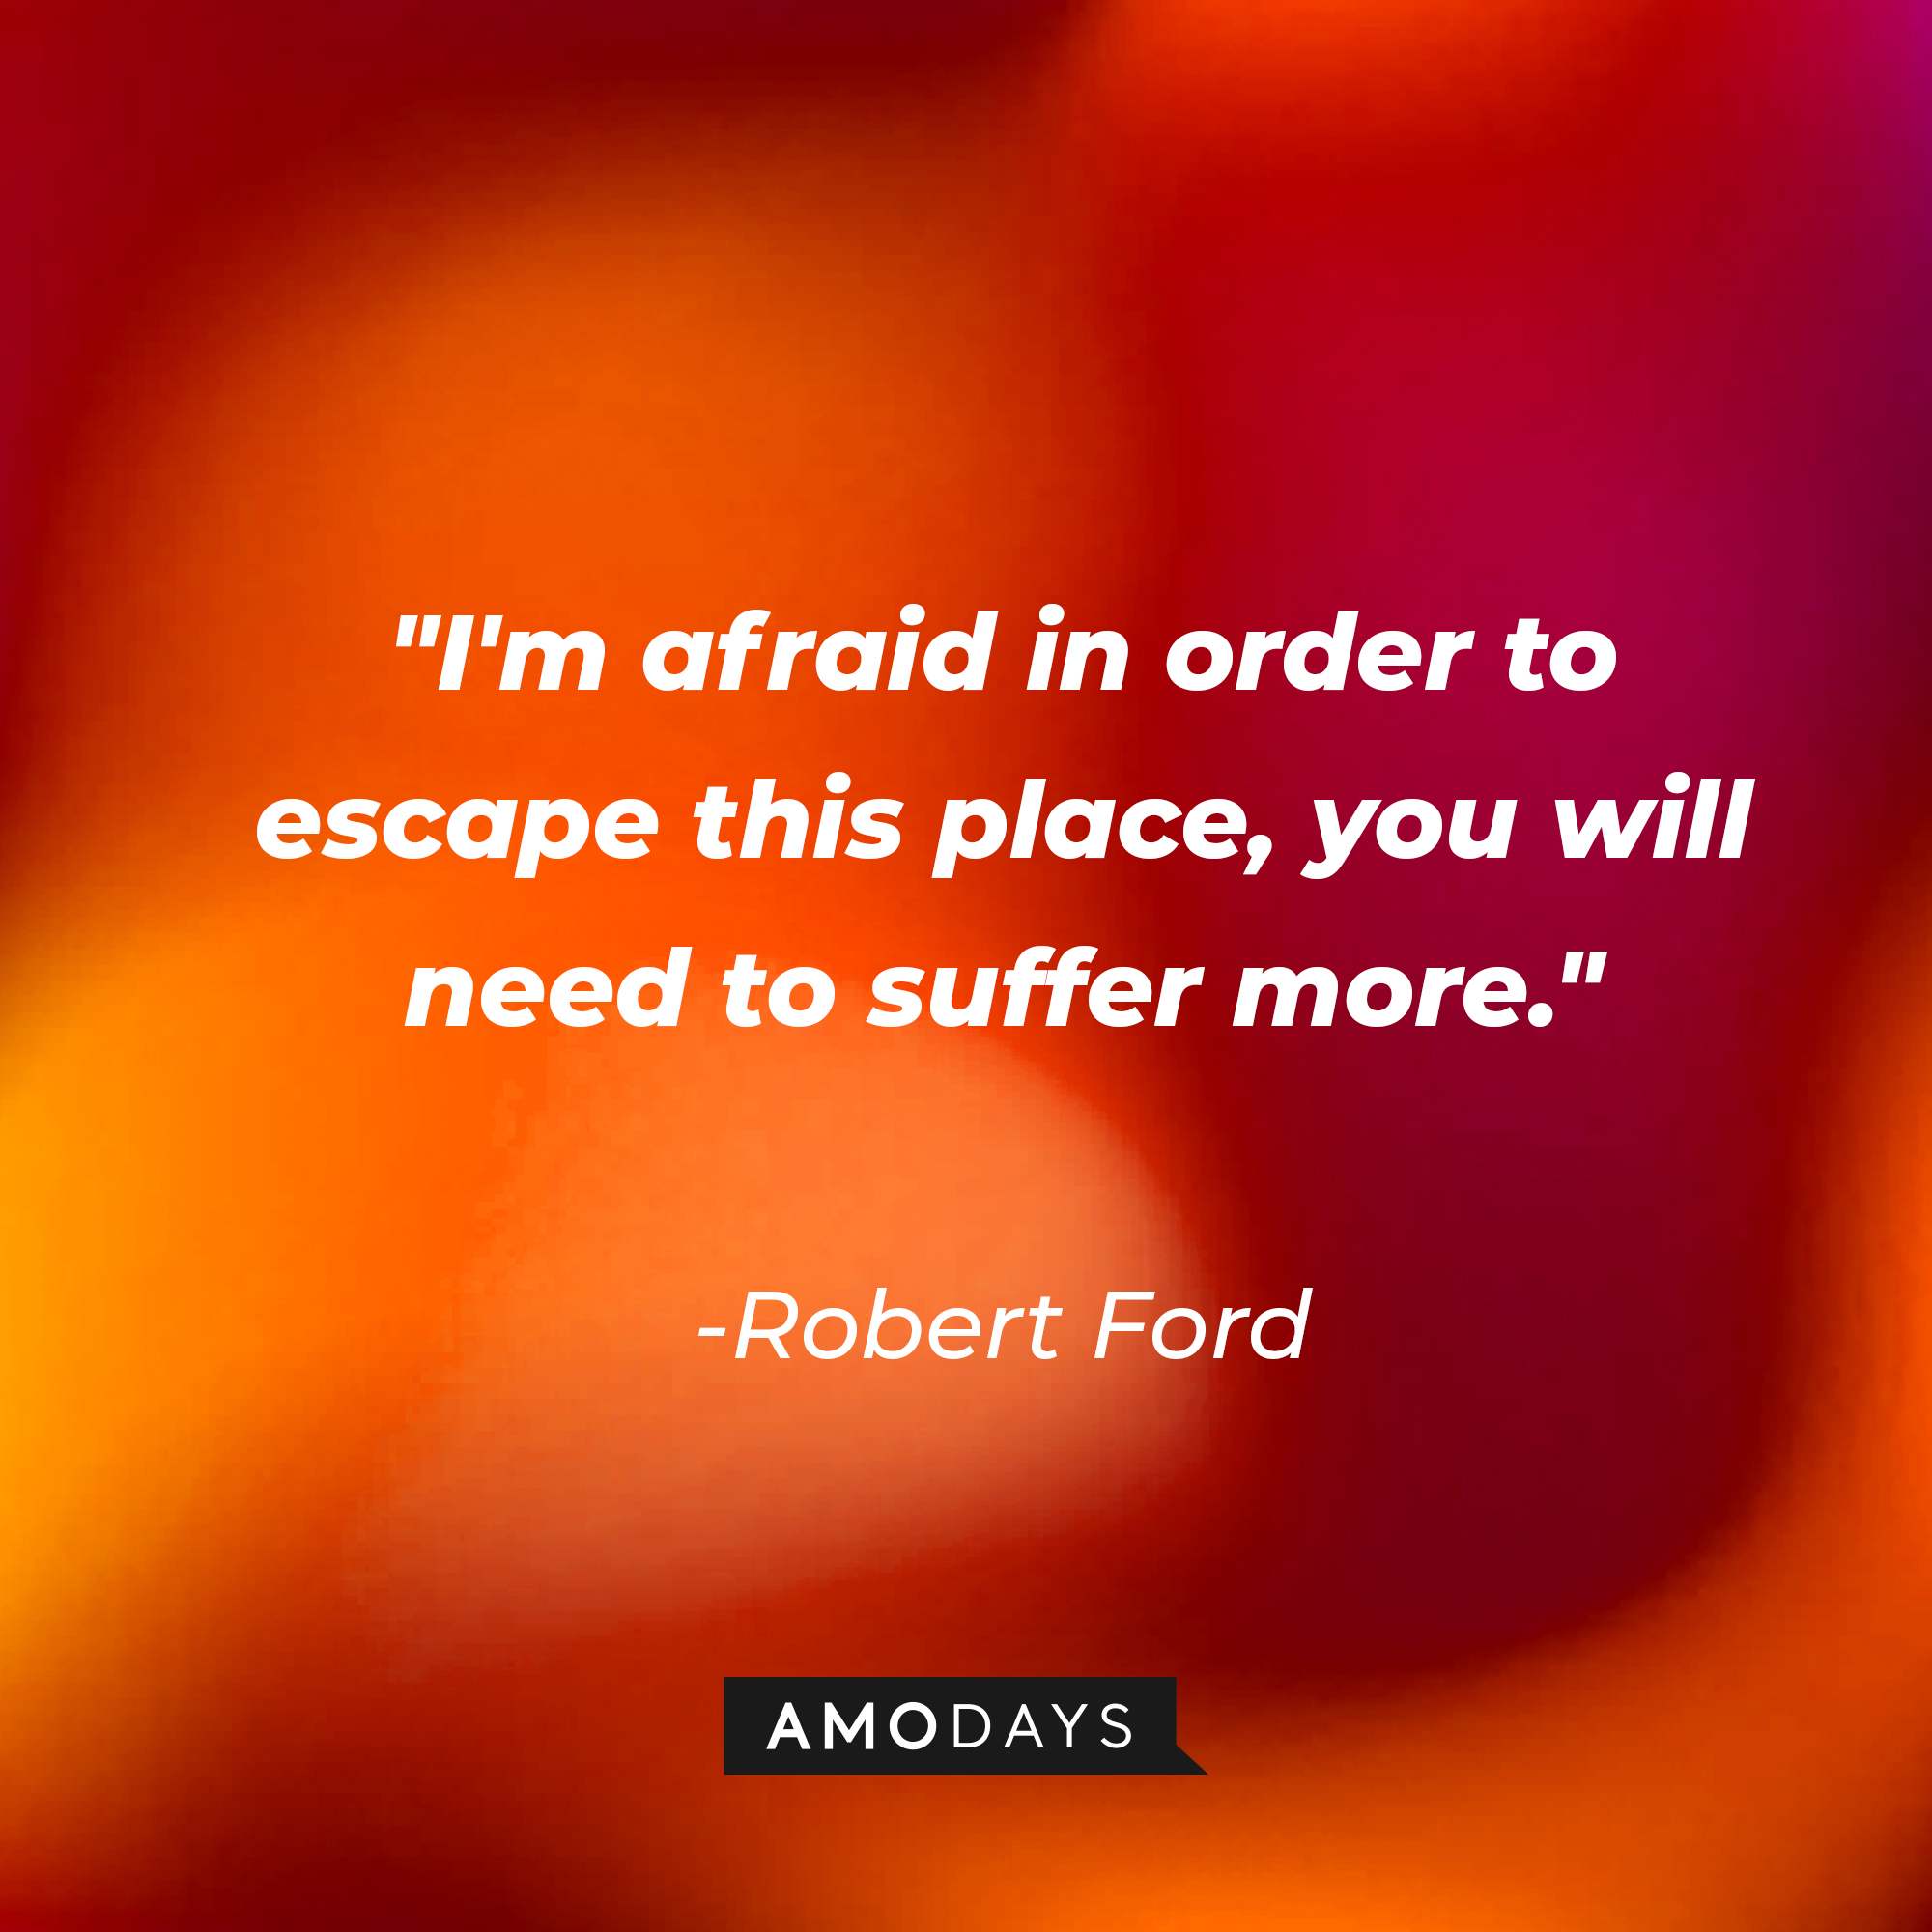 Robert Ford's quote: "I'm afraid in order to escape this place, you will need to suffer more." | Source: AmoDays